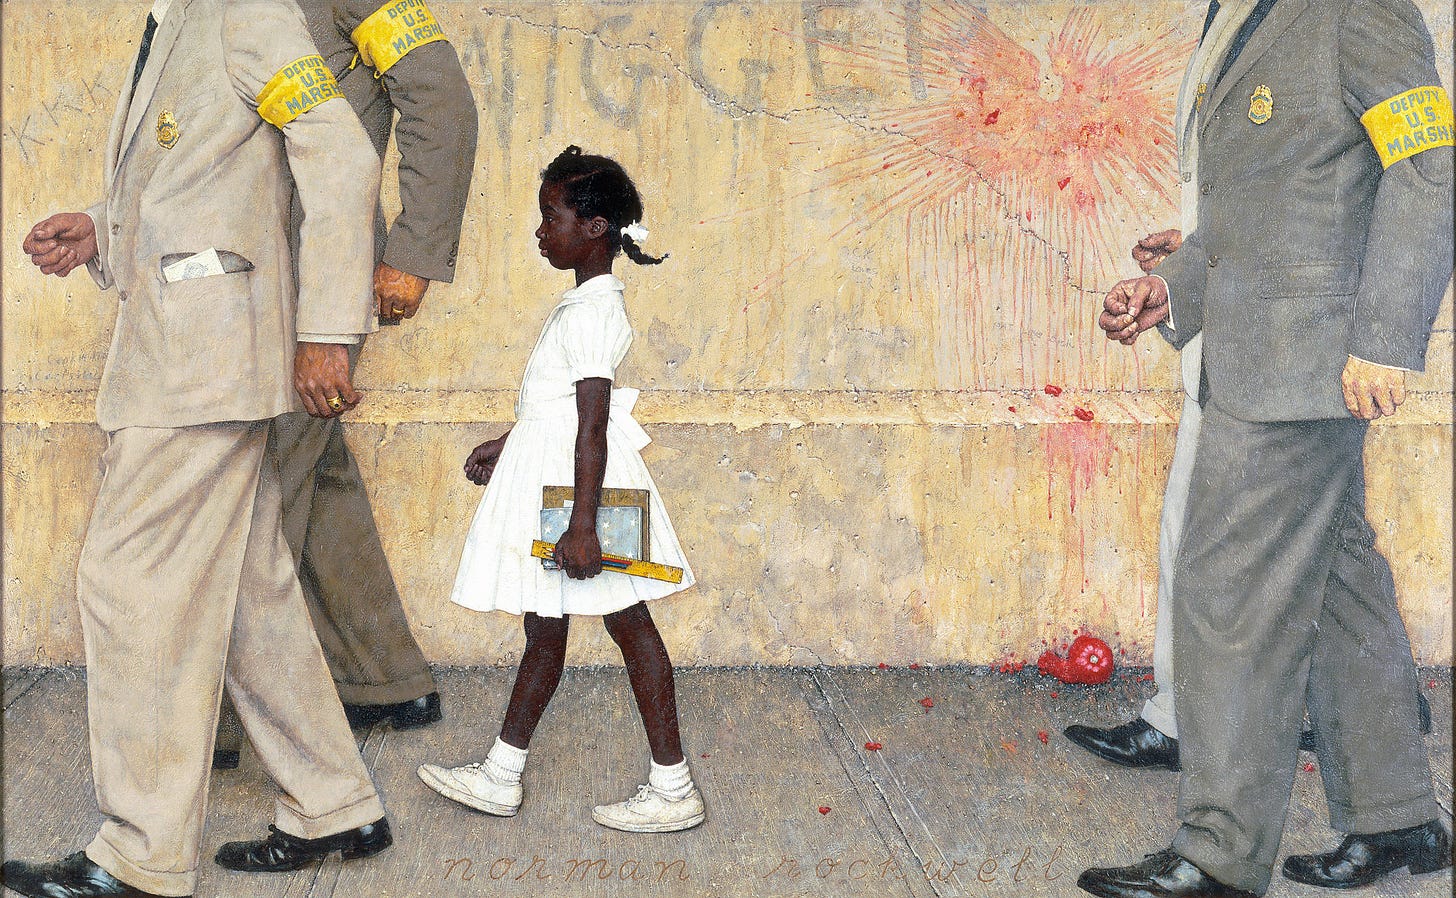 In a painting, a young Black girl is being escorted by four tall white men while they walk by a building wall. The girl wears a white dress with white shoes, white socks, and a white accessory in her hair. She carries school supplies in her hand. The men wear business suits with yellow arm bands that read “Deputy U.S. Marshal.” A racial slur has been sprayed on the wall and the splatter marks remain from a thrown tomato that rests on the pavement.